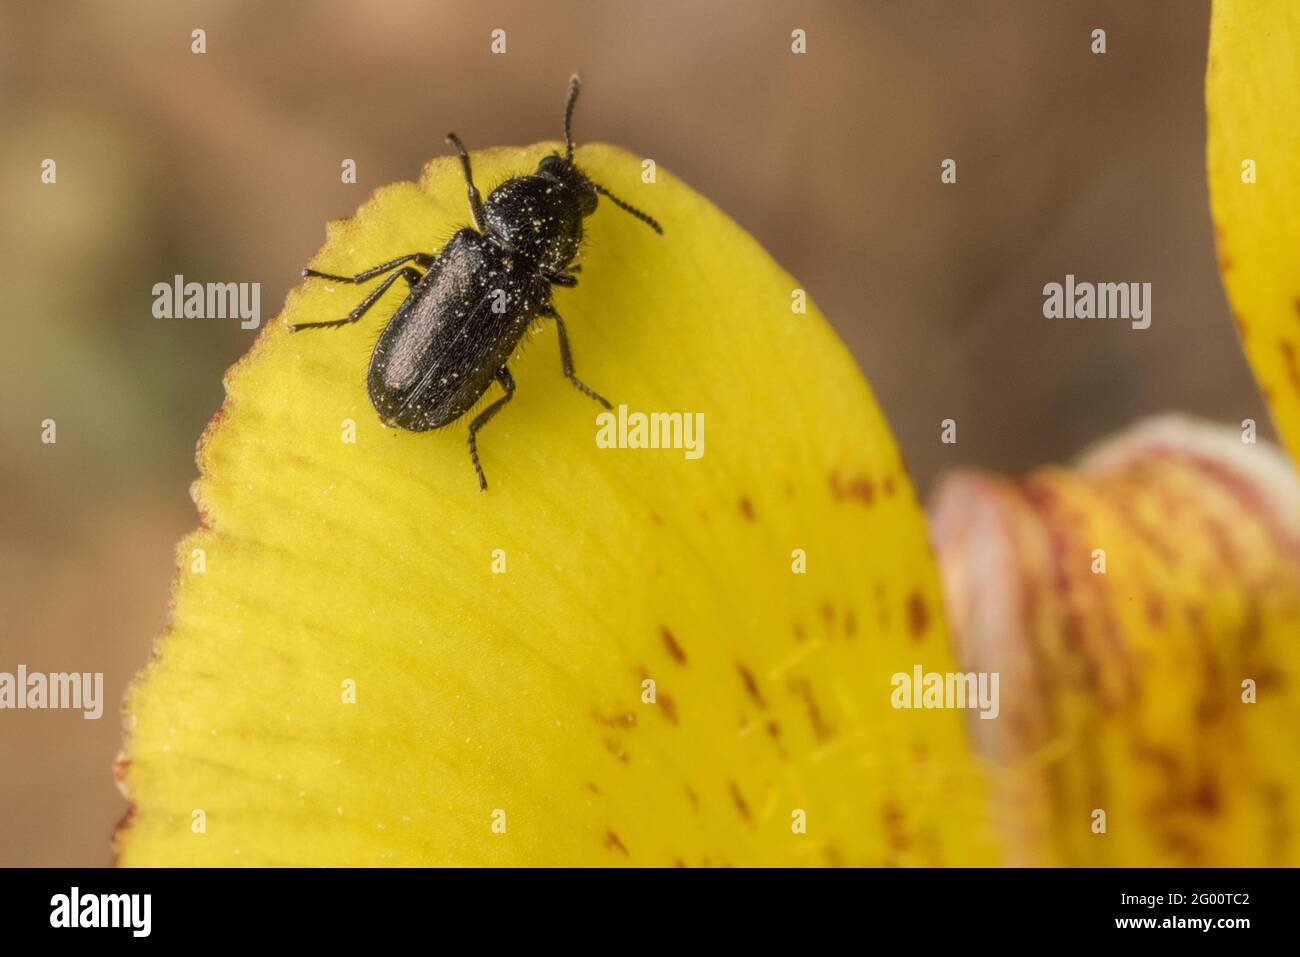 Beetles feed at the nectaries within a yellow mariposa lily flower (Calochortus luteus) in California. The beetles are important insect pollinators. Stock Photo